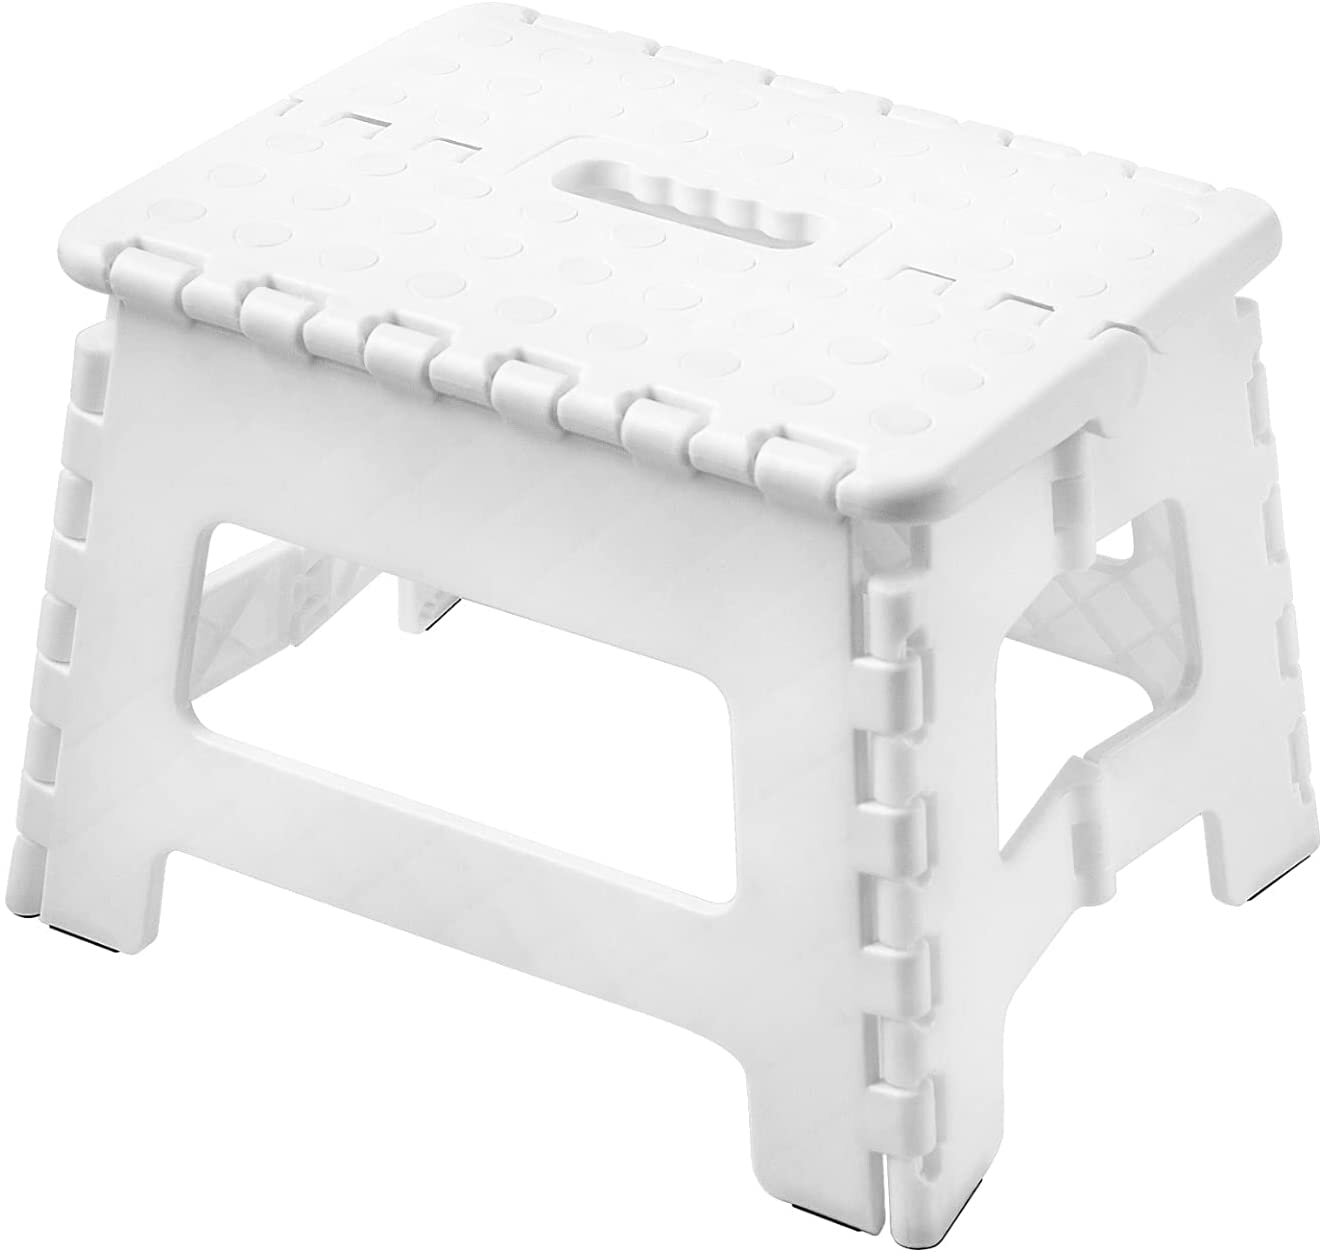 Bedroom Great for Kitchen Kids or Adults. Bathroom Folding Step Stool Lightweight 11 Inch Step Stool is Sturdy Enough to Support Adults and Safe Enough for Kids Opens Easy with One Flip Black 